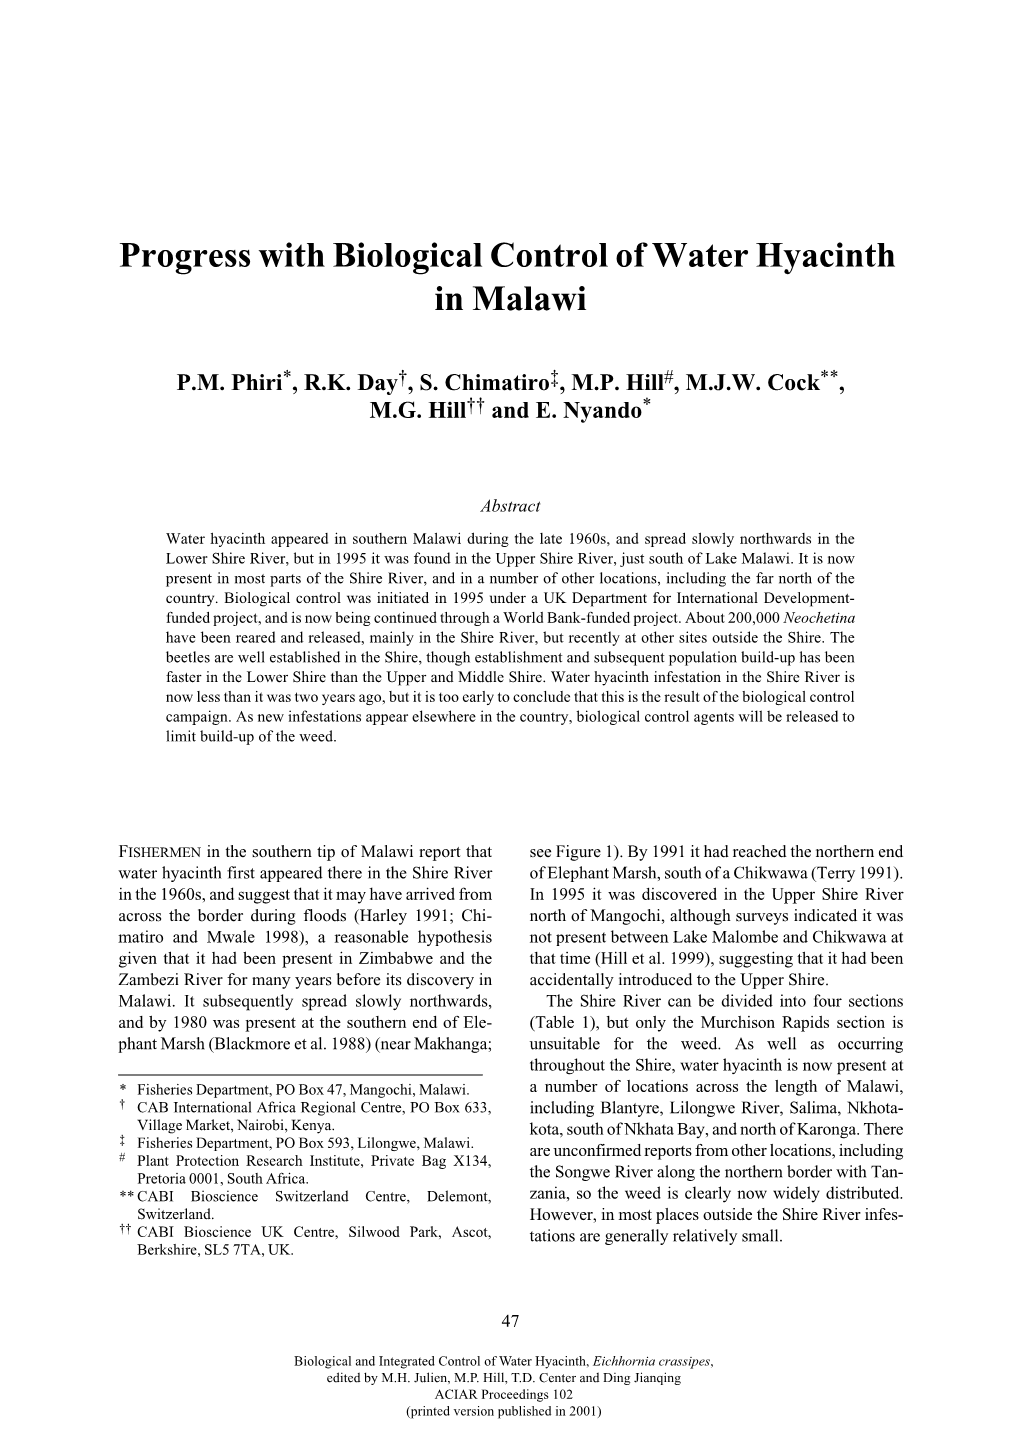 Progress with Biological Control of Water Hyacinth in Malawi